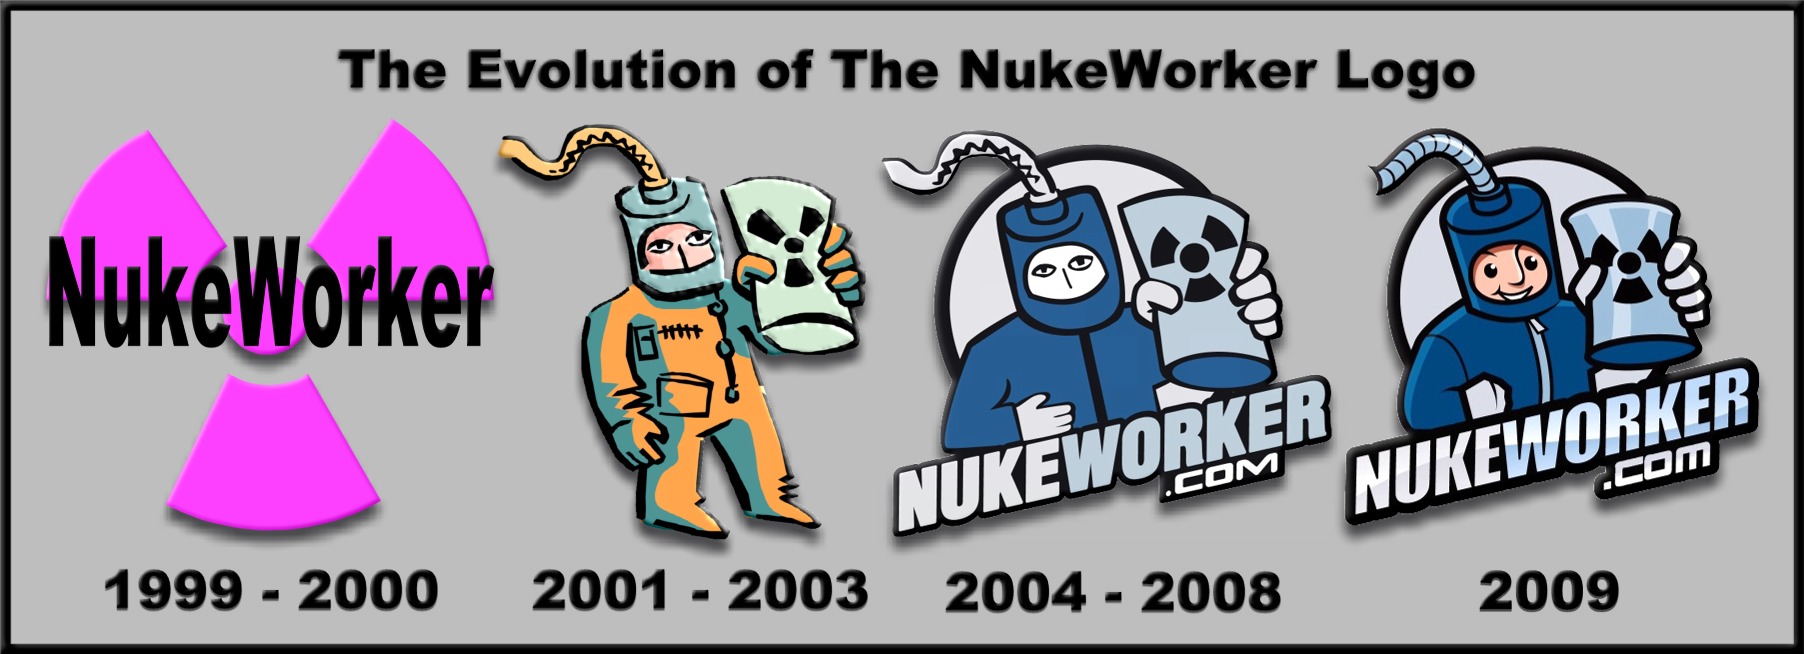 The Evolution of The NukeWorker Logo
The NukeWorker Logo from its birth in 1999 to to 10 year Aniv. in 2009
